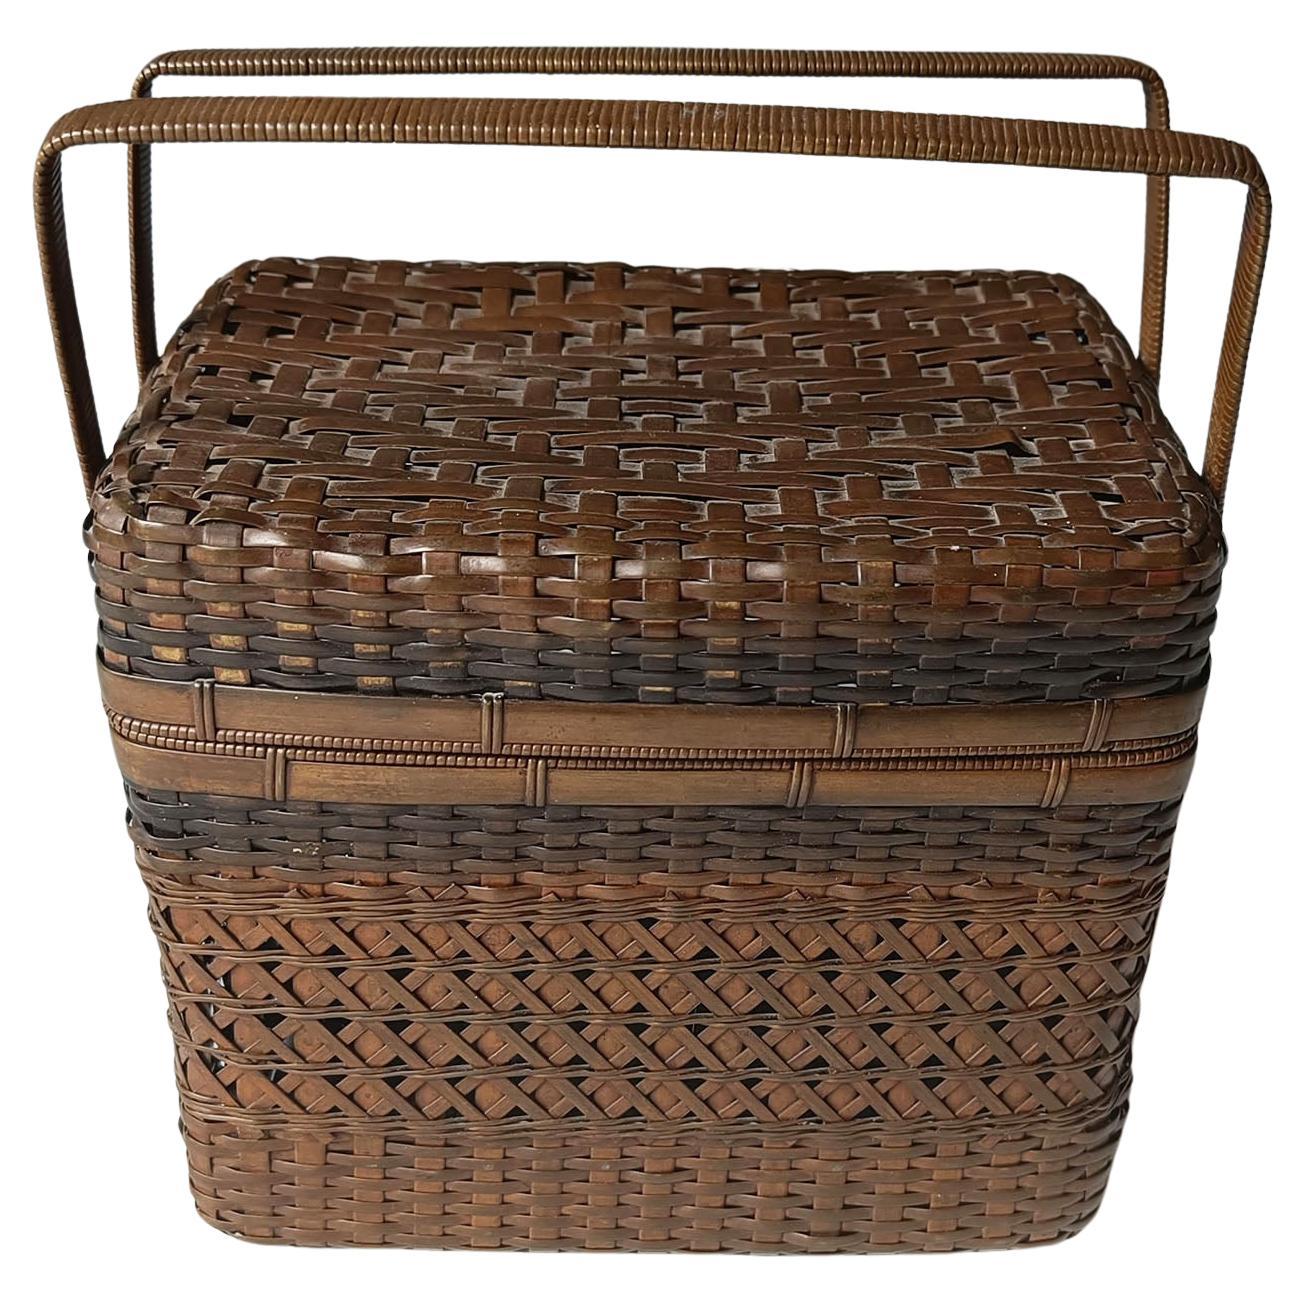 Fine Antique Japanese woven copper box basket Asian Antiques Ikebana 中国古董 For Sale